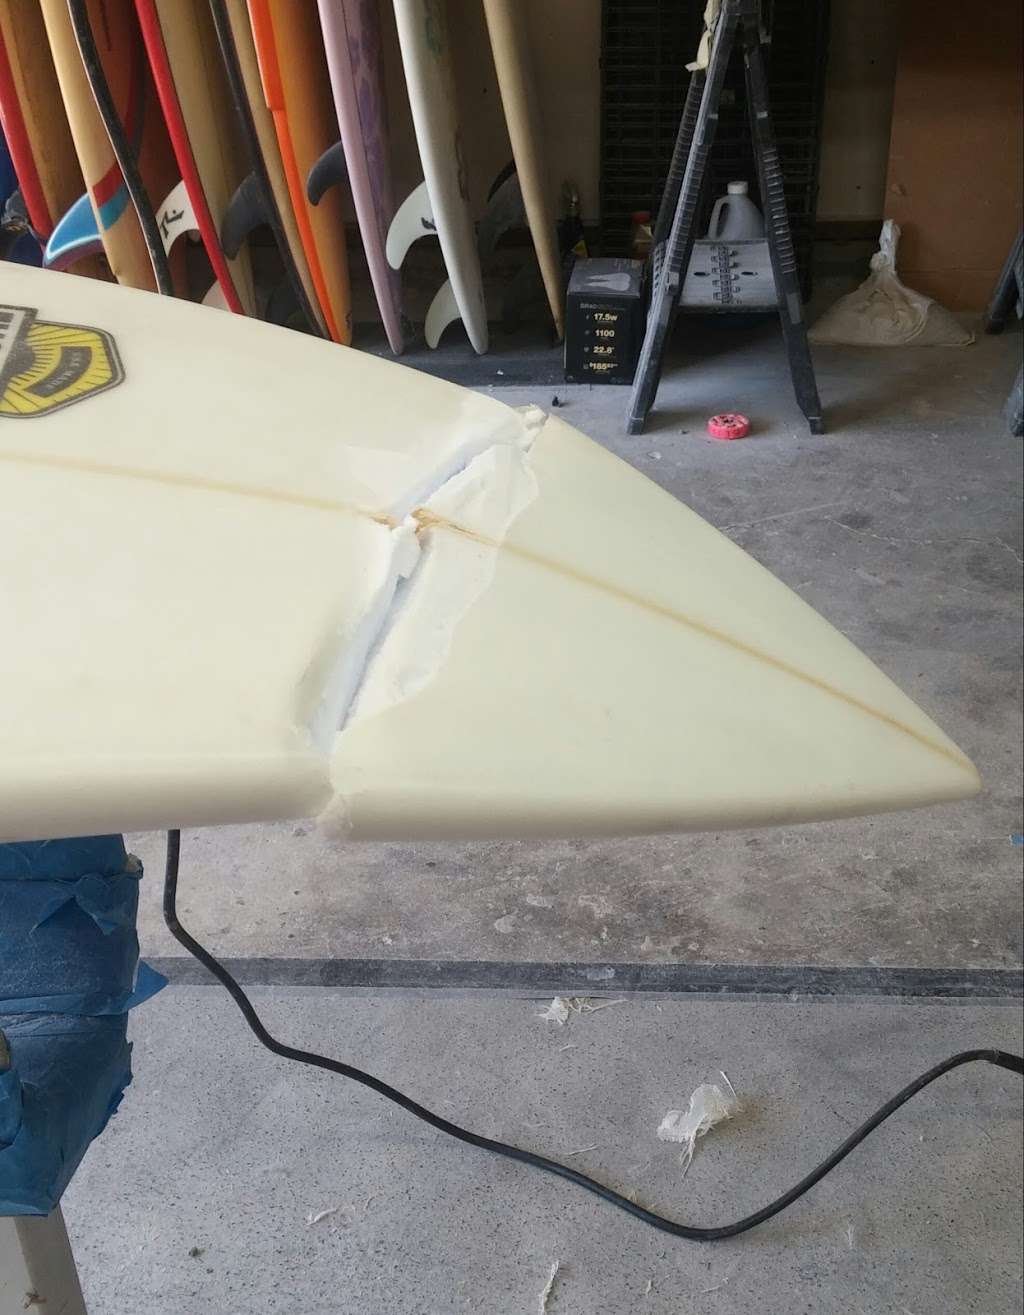 AB Surfboard Repair/AB Pro Glassing/AB Pro Surfboard Designs | Studebaker Rd/Stearns Ave, Long Beach, CA 90815 | Phone: (424) 221-1069